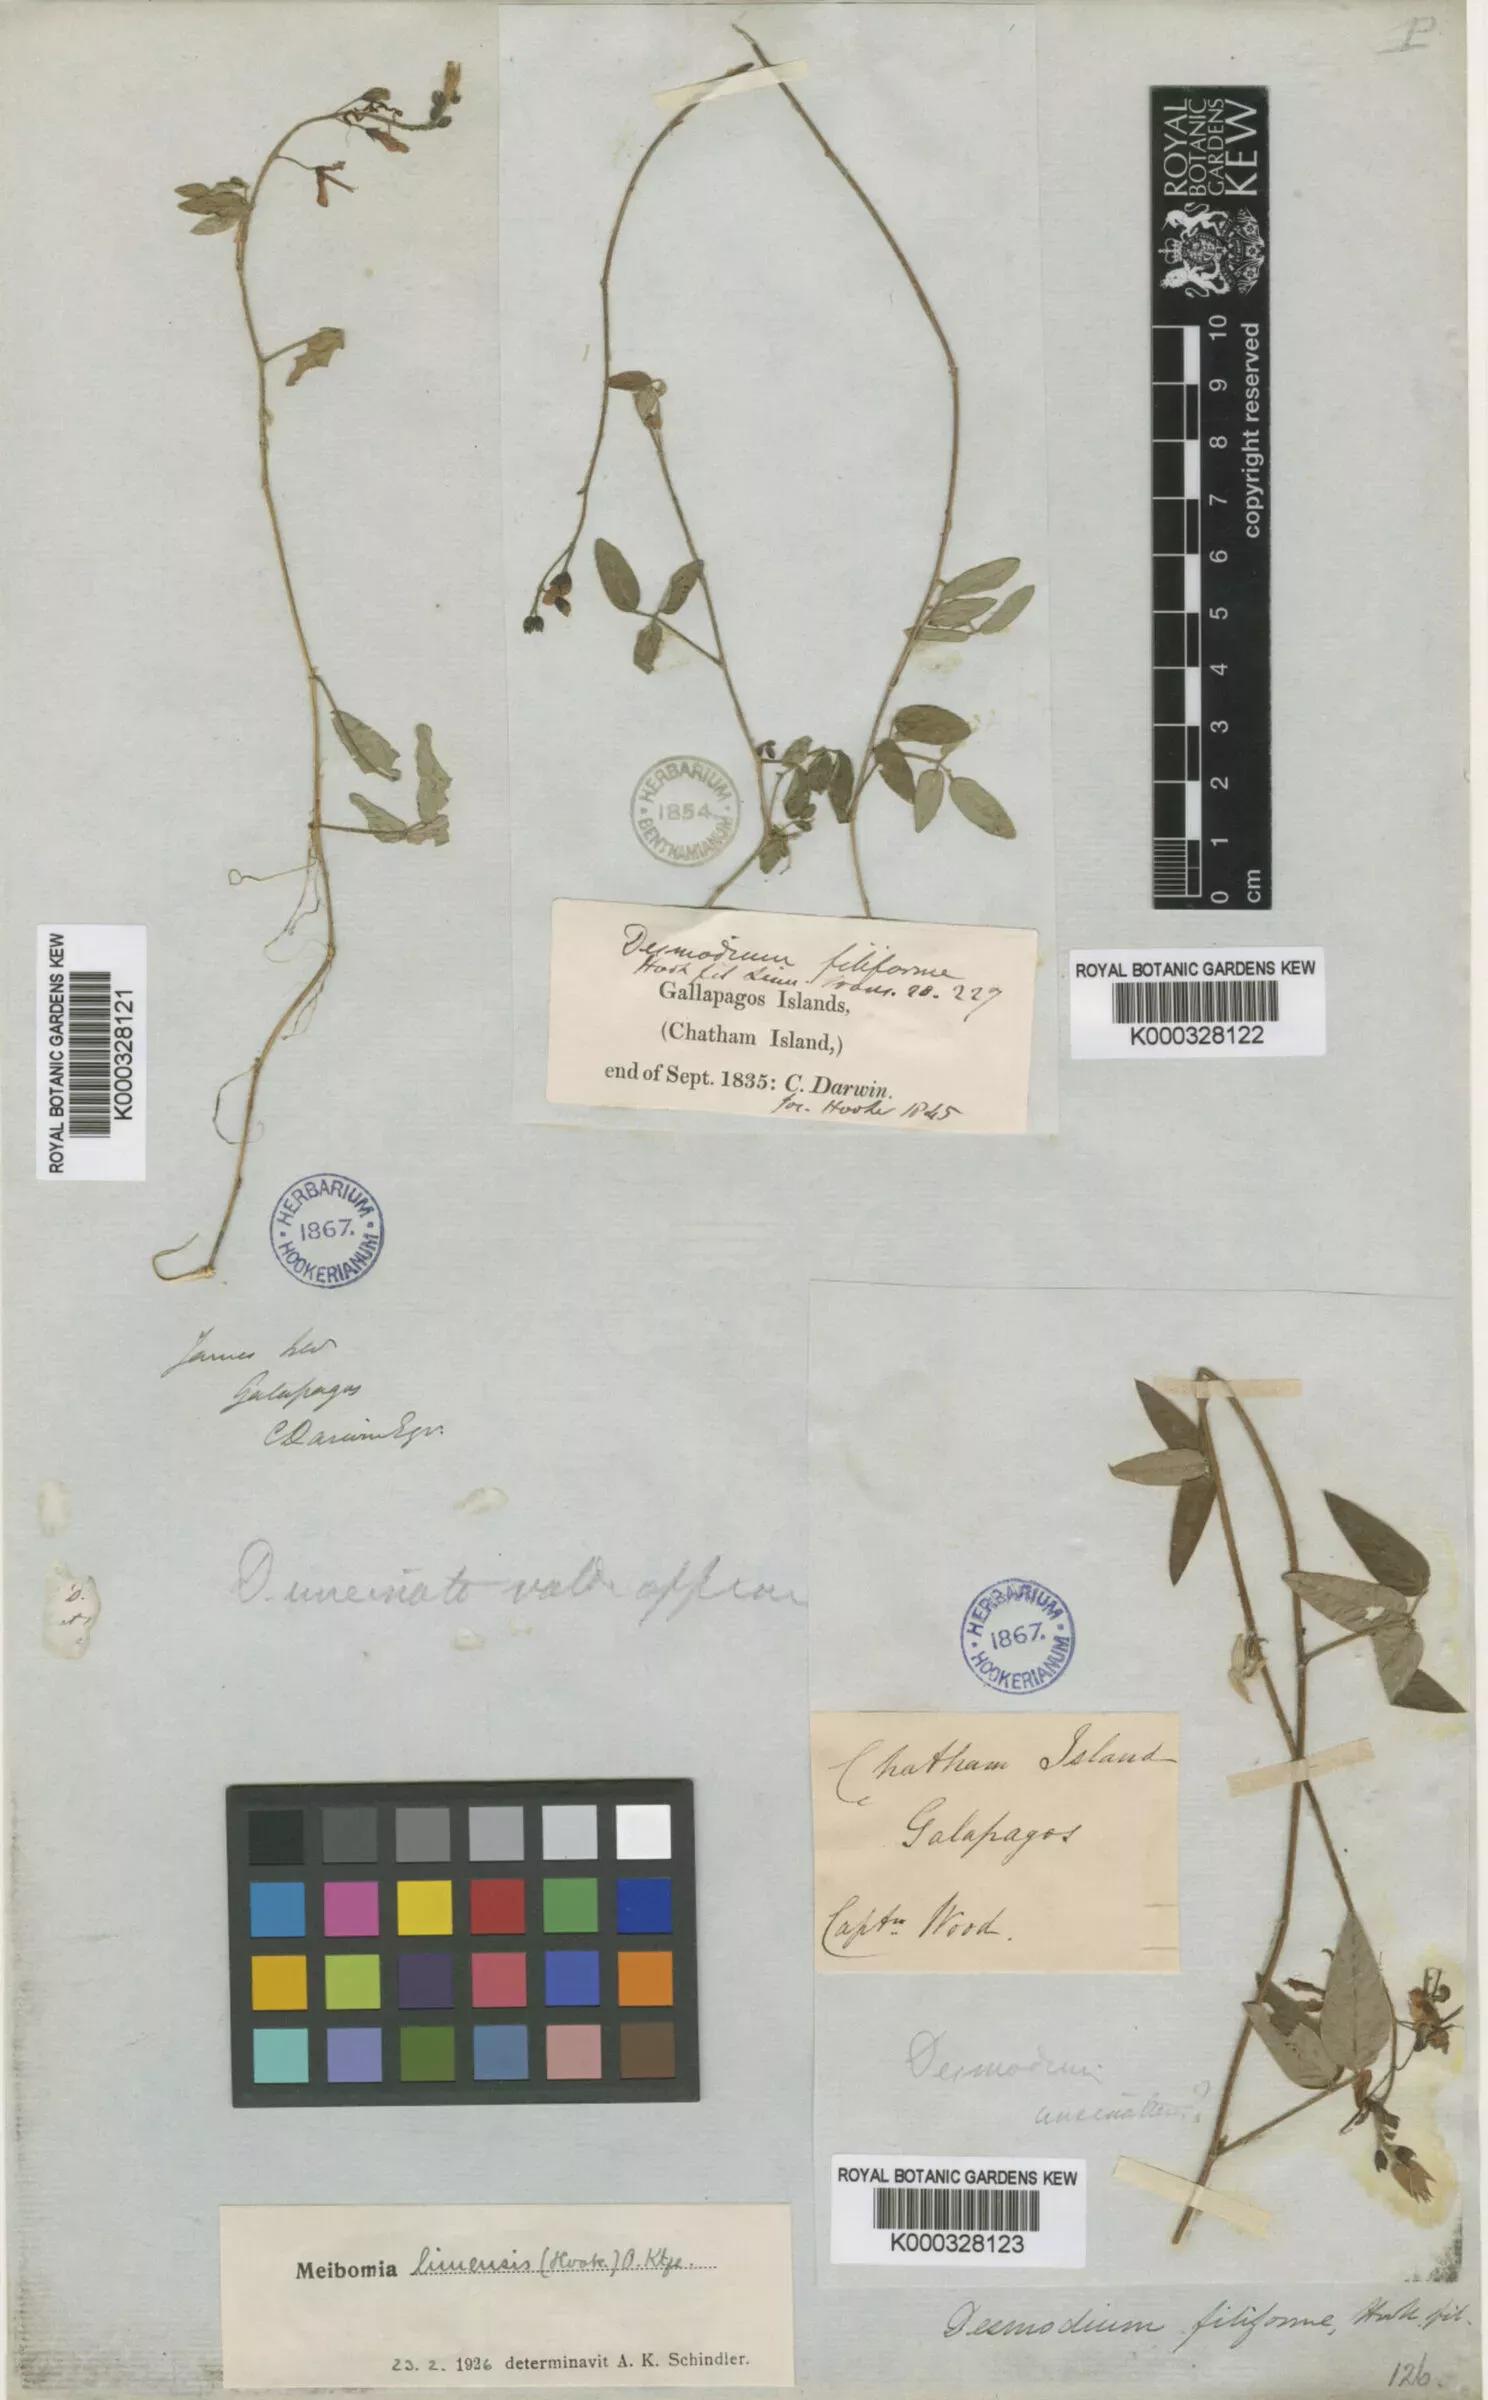 A herbarium specimen collected by Charles Darwin